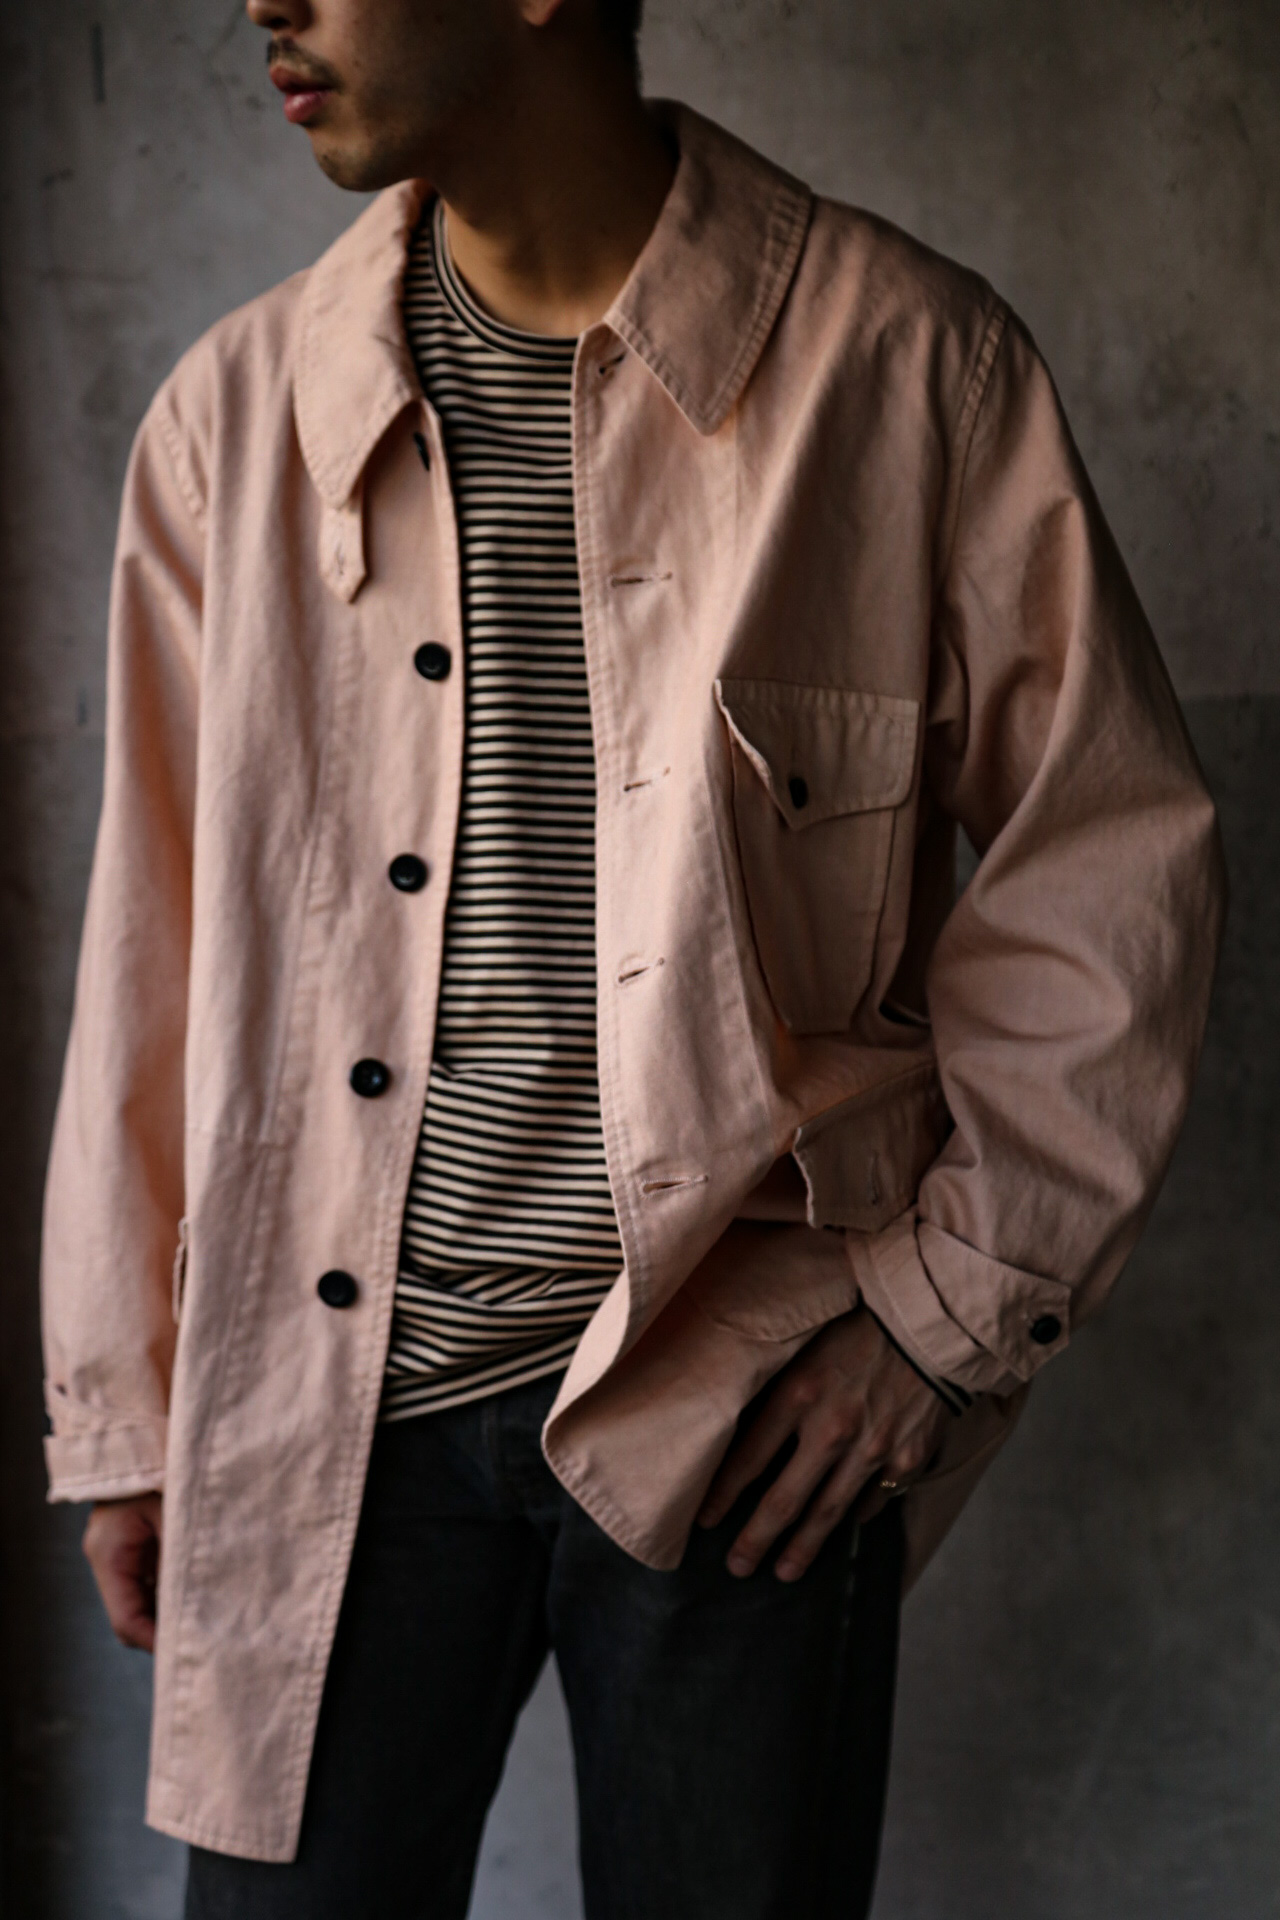 OUTIL ウティ　MANTEAU LOUEY PINKウティ